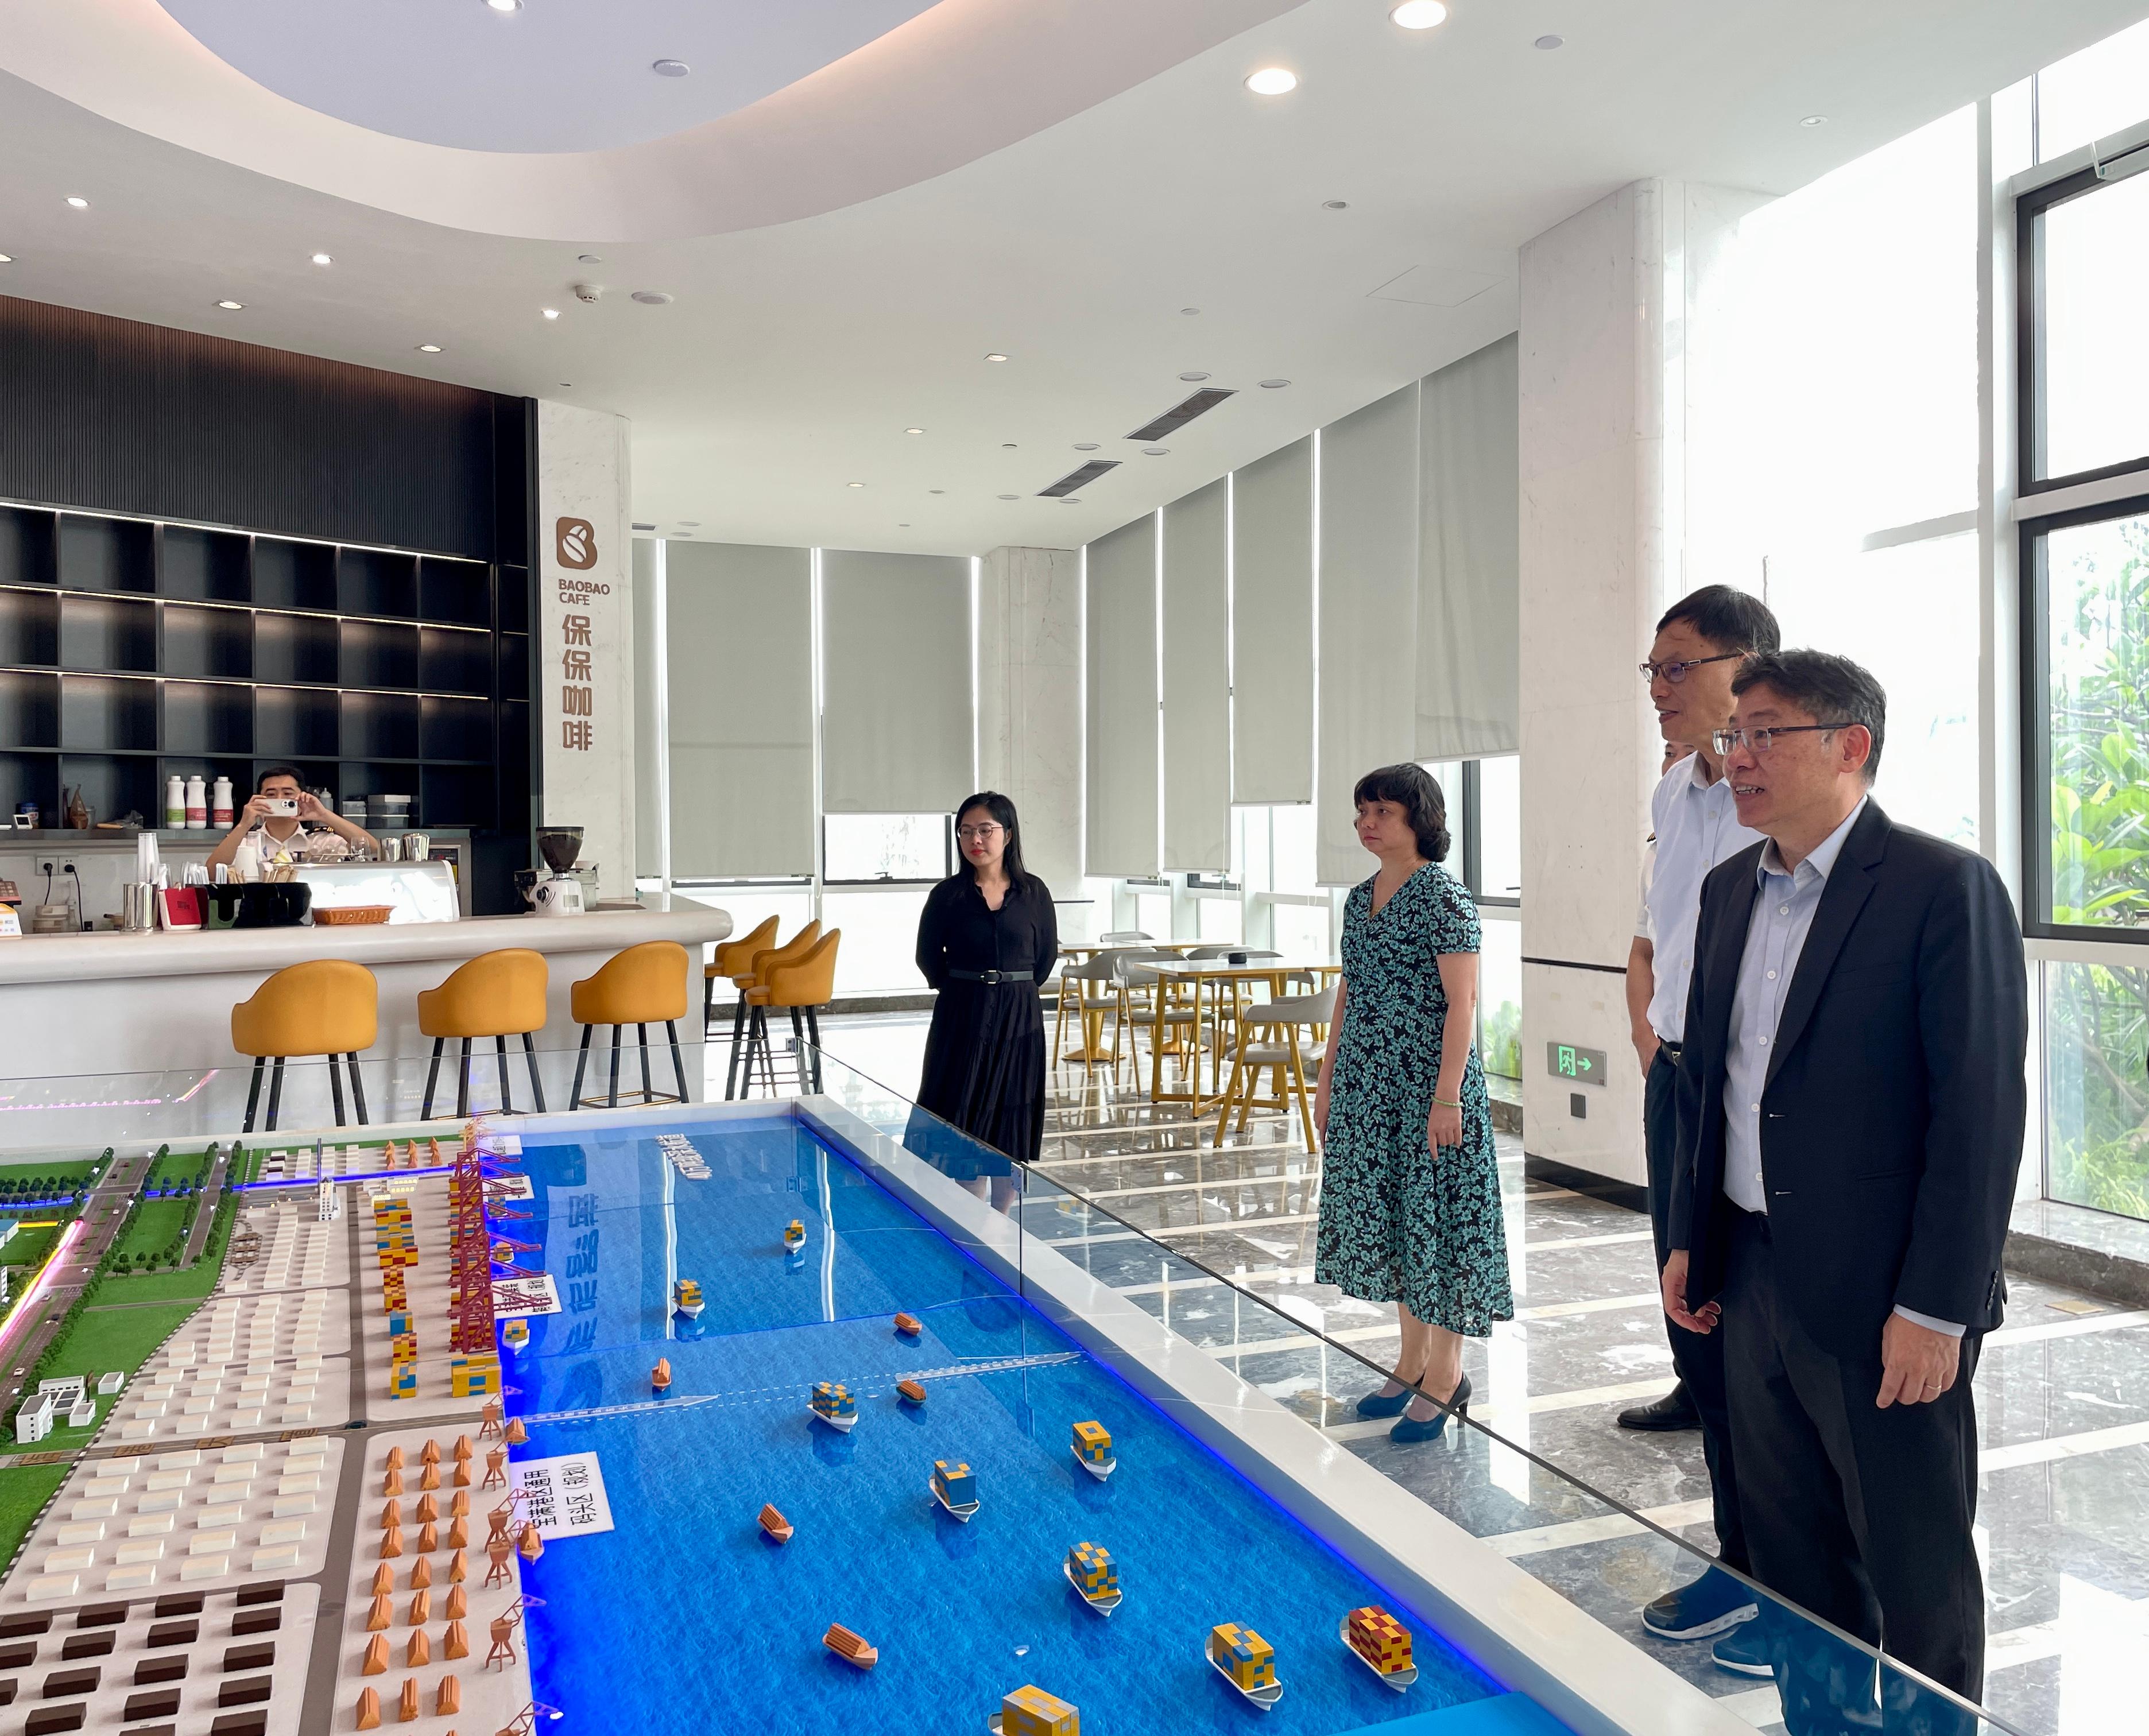 The Secretary for Transport and Logistics, Mr Lam Sai-hung (first right), visits the the Zhanjiang Comprehensive Bonded Area today (June 5) in the company of Vice Mayor of the Zhanjiang Municipal Government Mr Kong Haiwen (second right). 